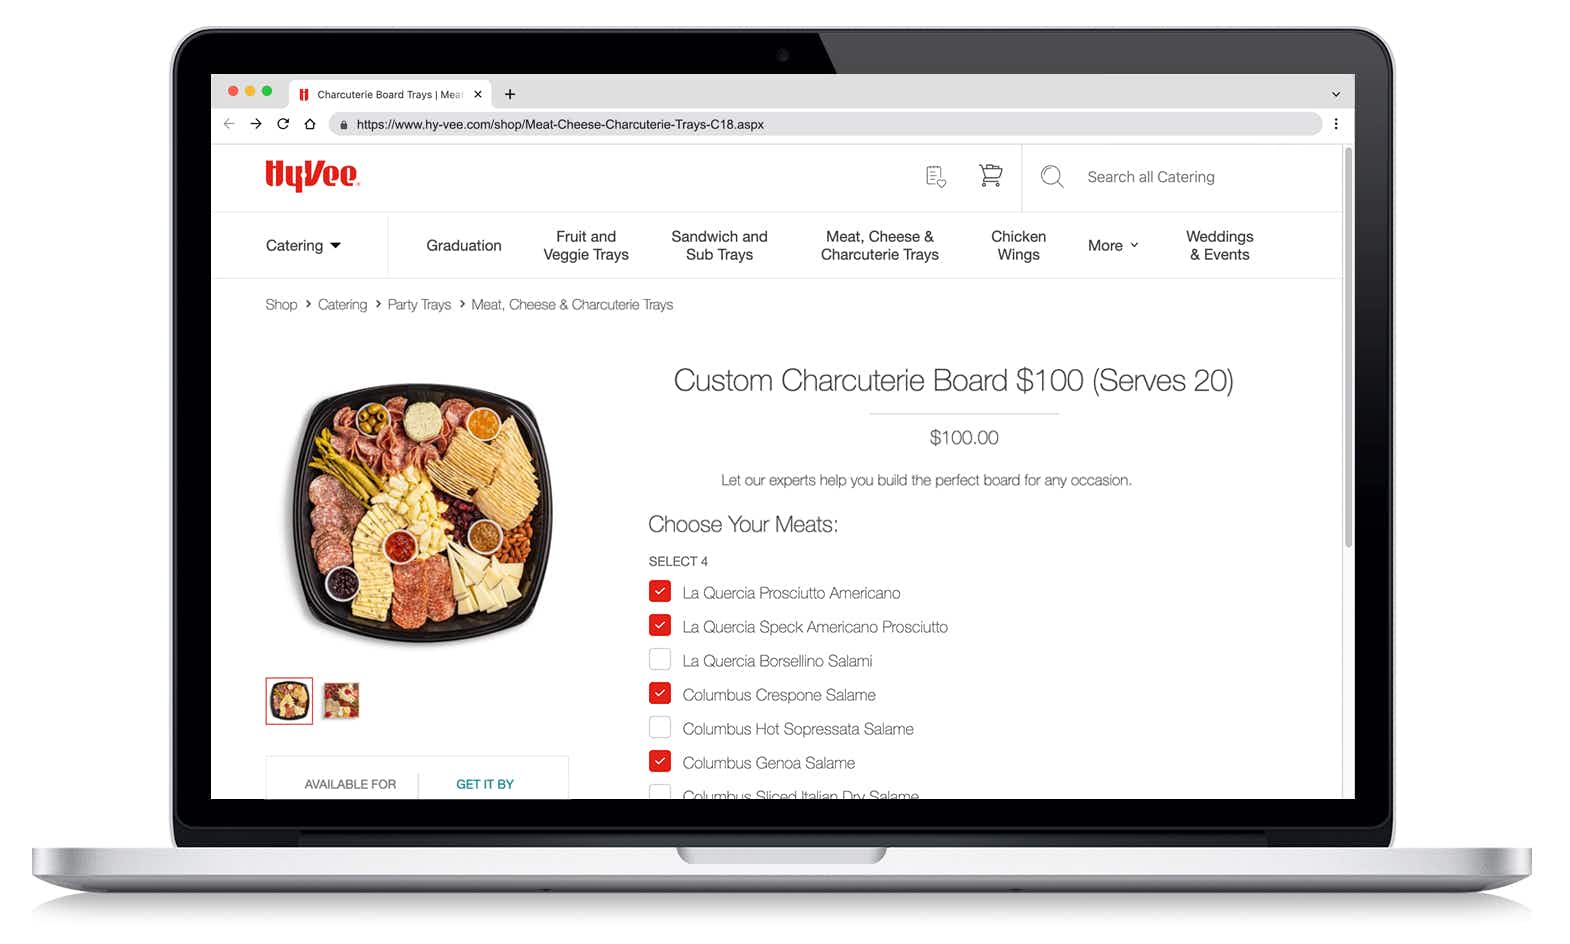 hy-vee-catering-charcuterie-trays-laptop-screenshot-2